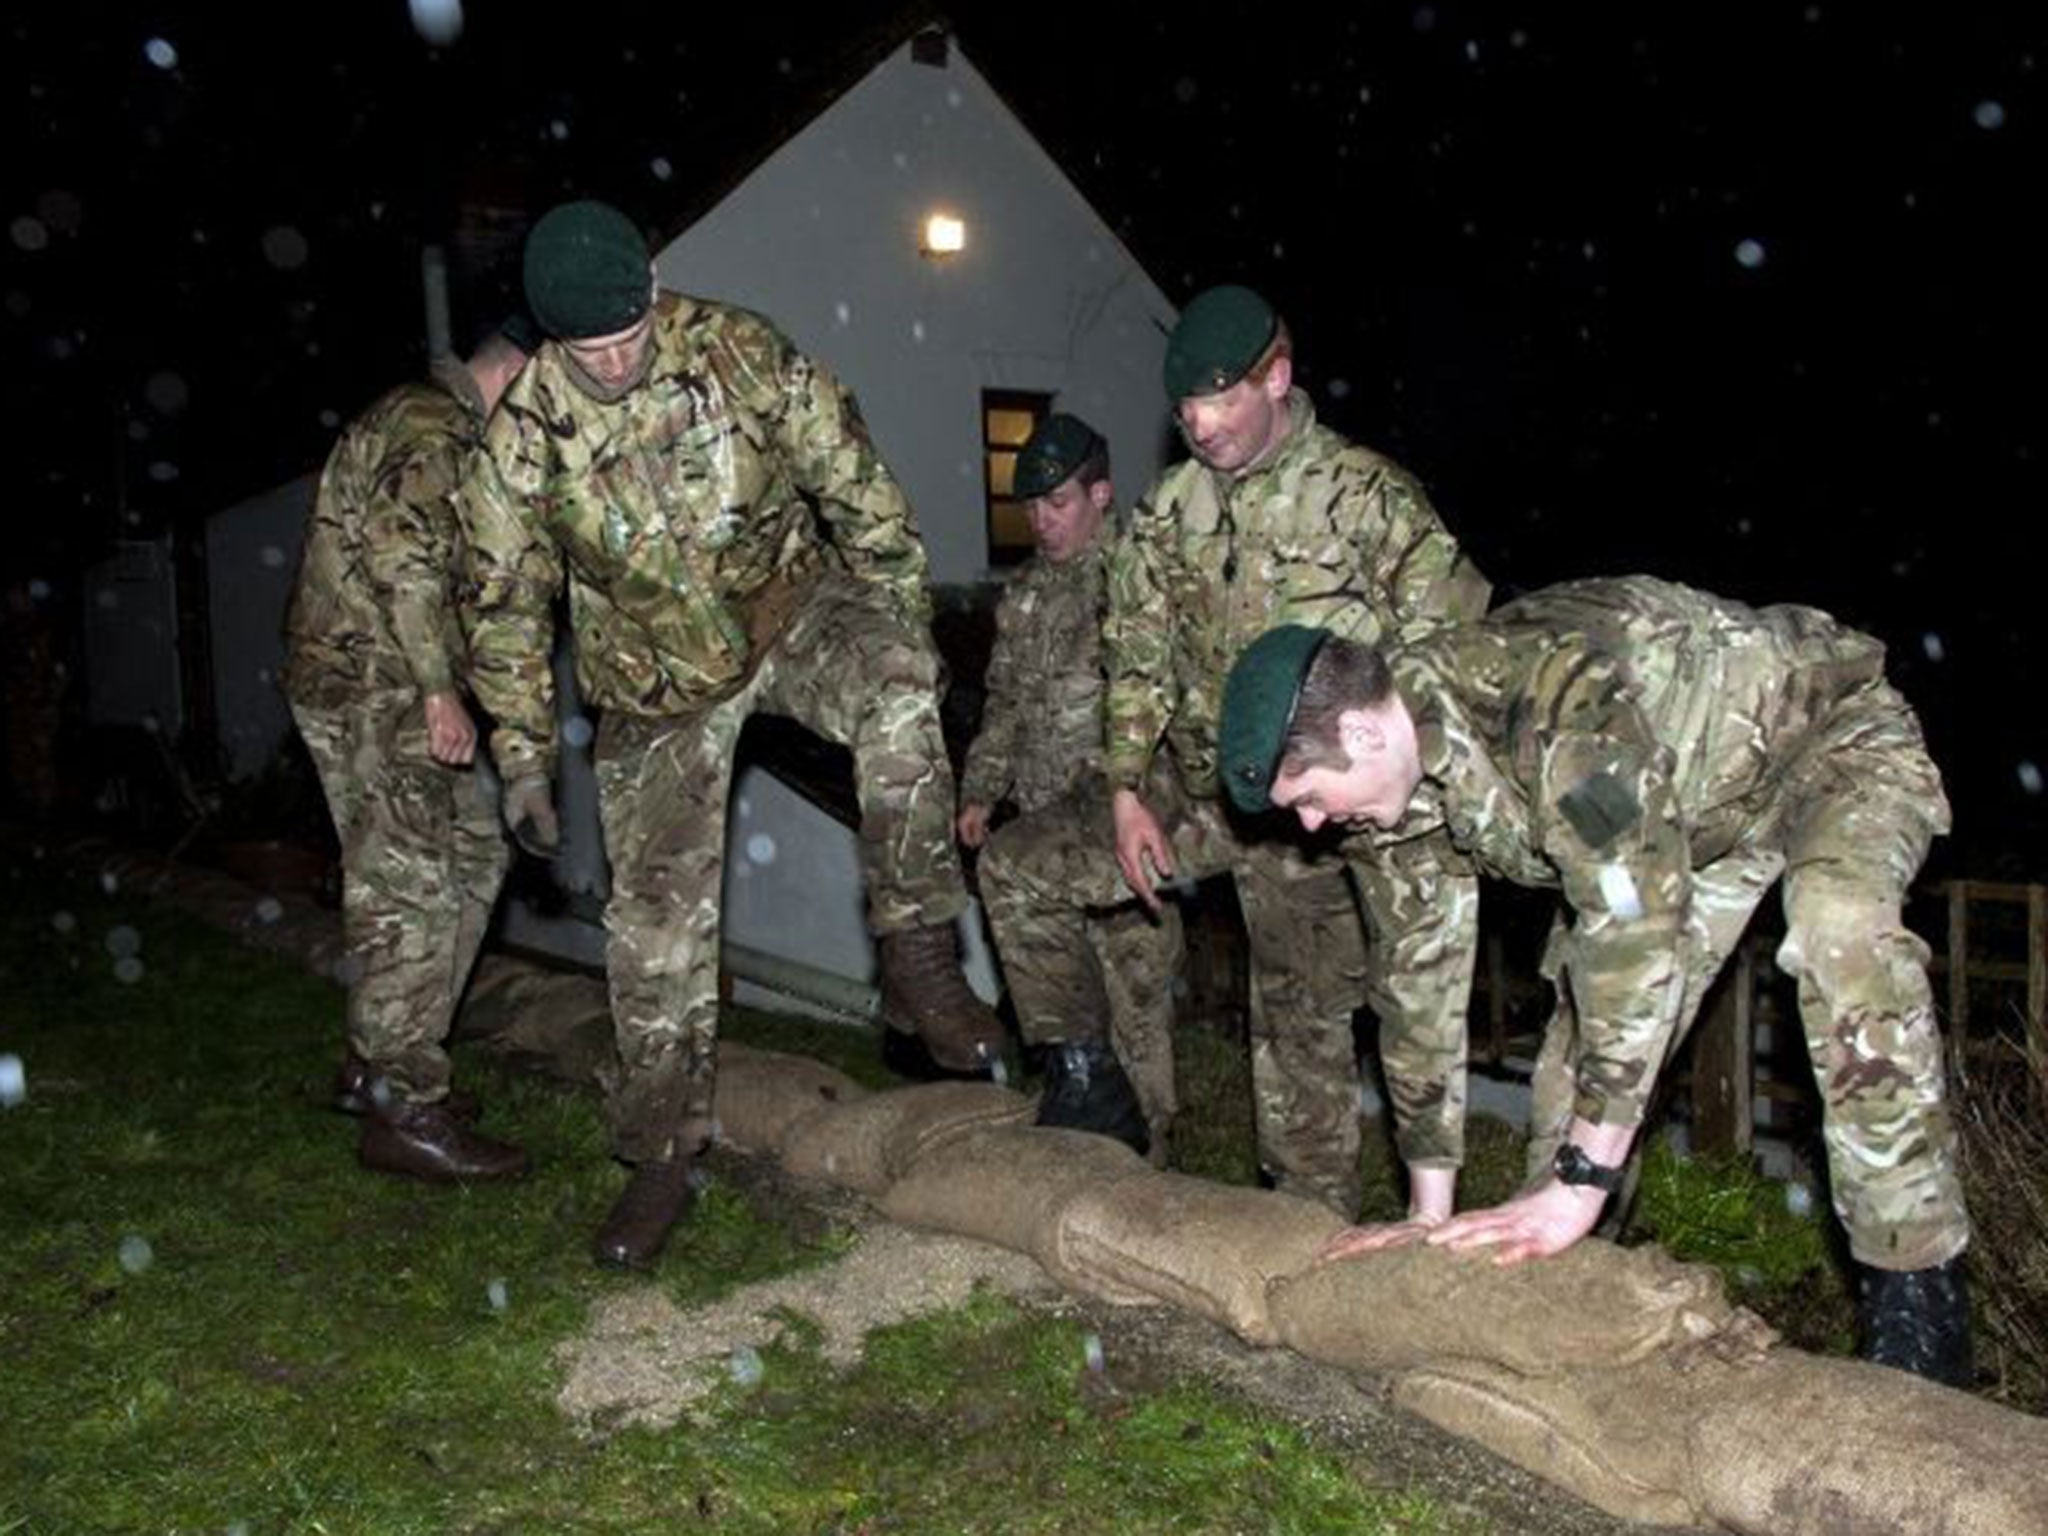 Royal Marines who had been in the region building sandbag defences were drafted in to assist with the evacuation of residents in the village of Moorland this morning